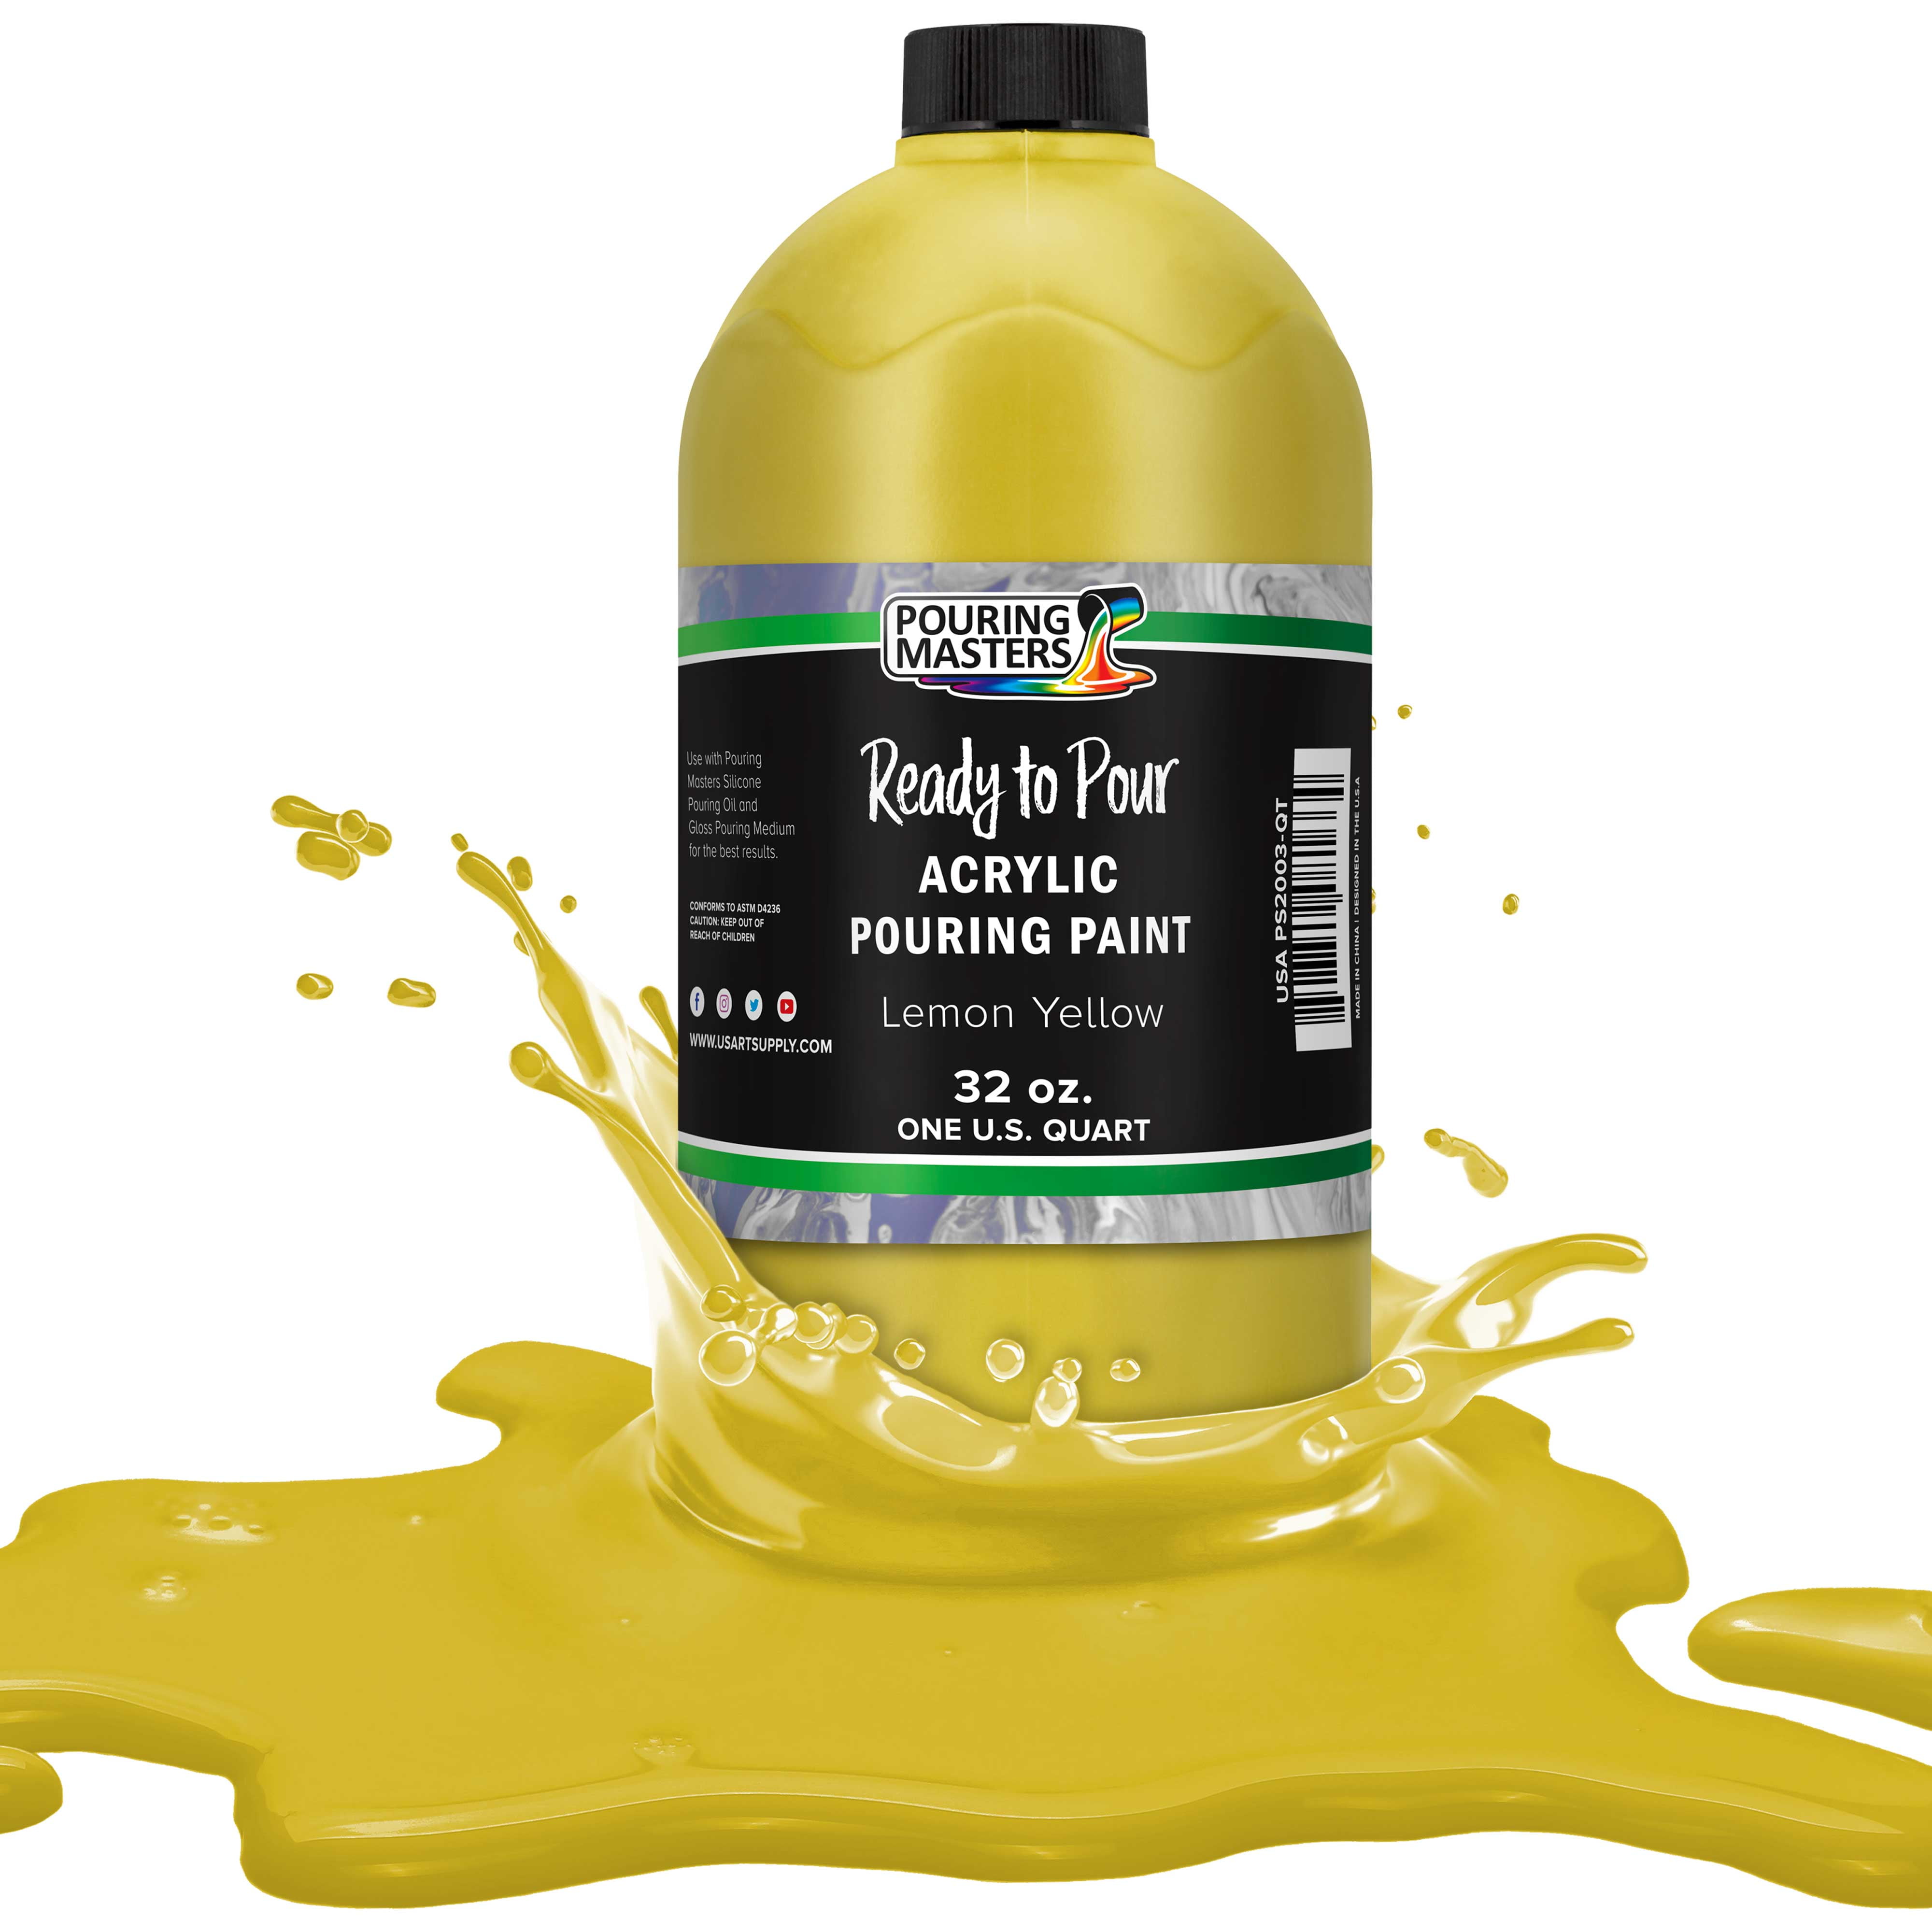 Pouring Masters Lemon Yellow Acrylic Ready to Pour Pouring Paint